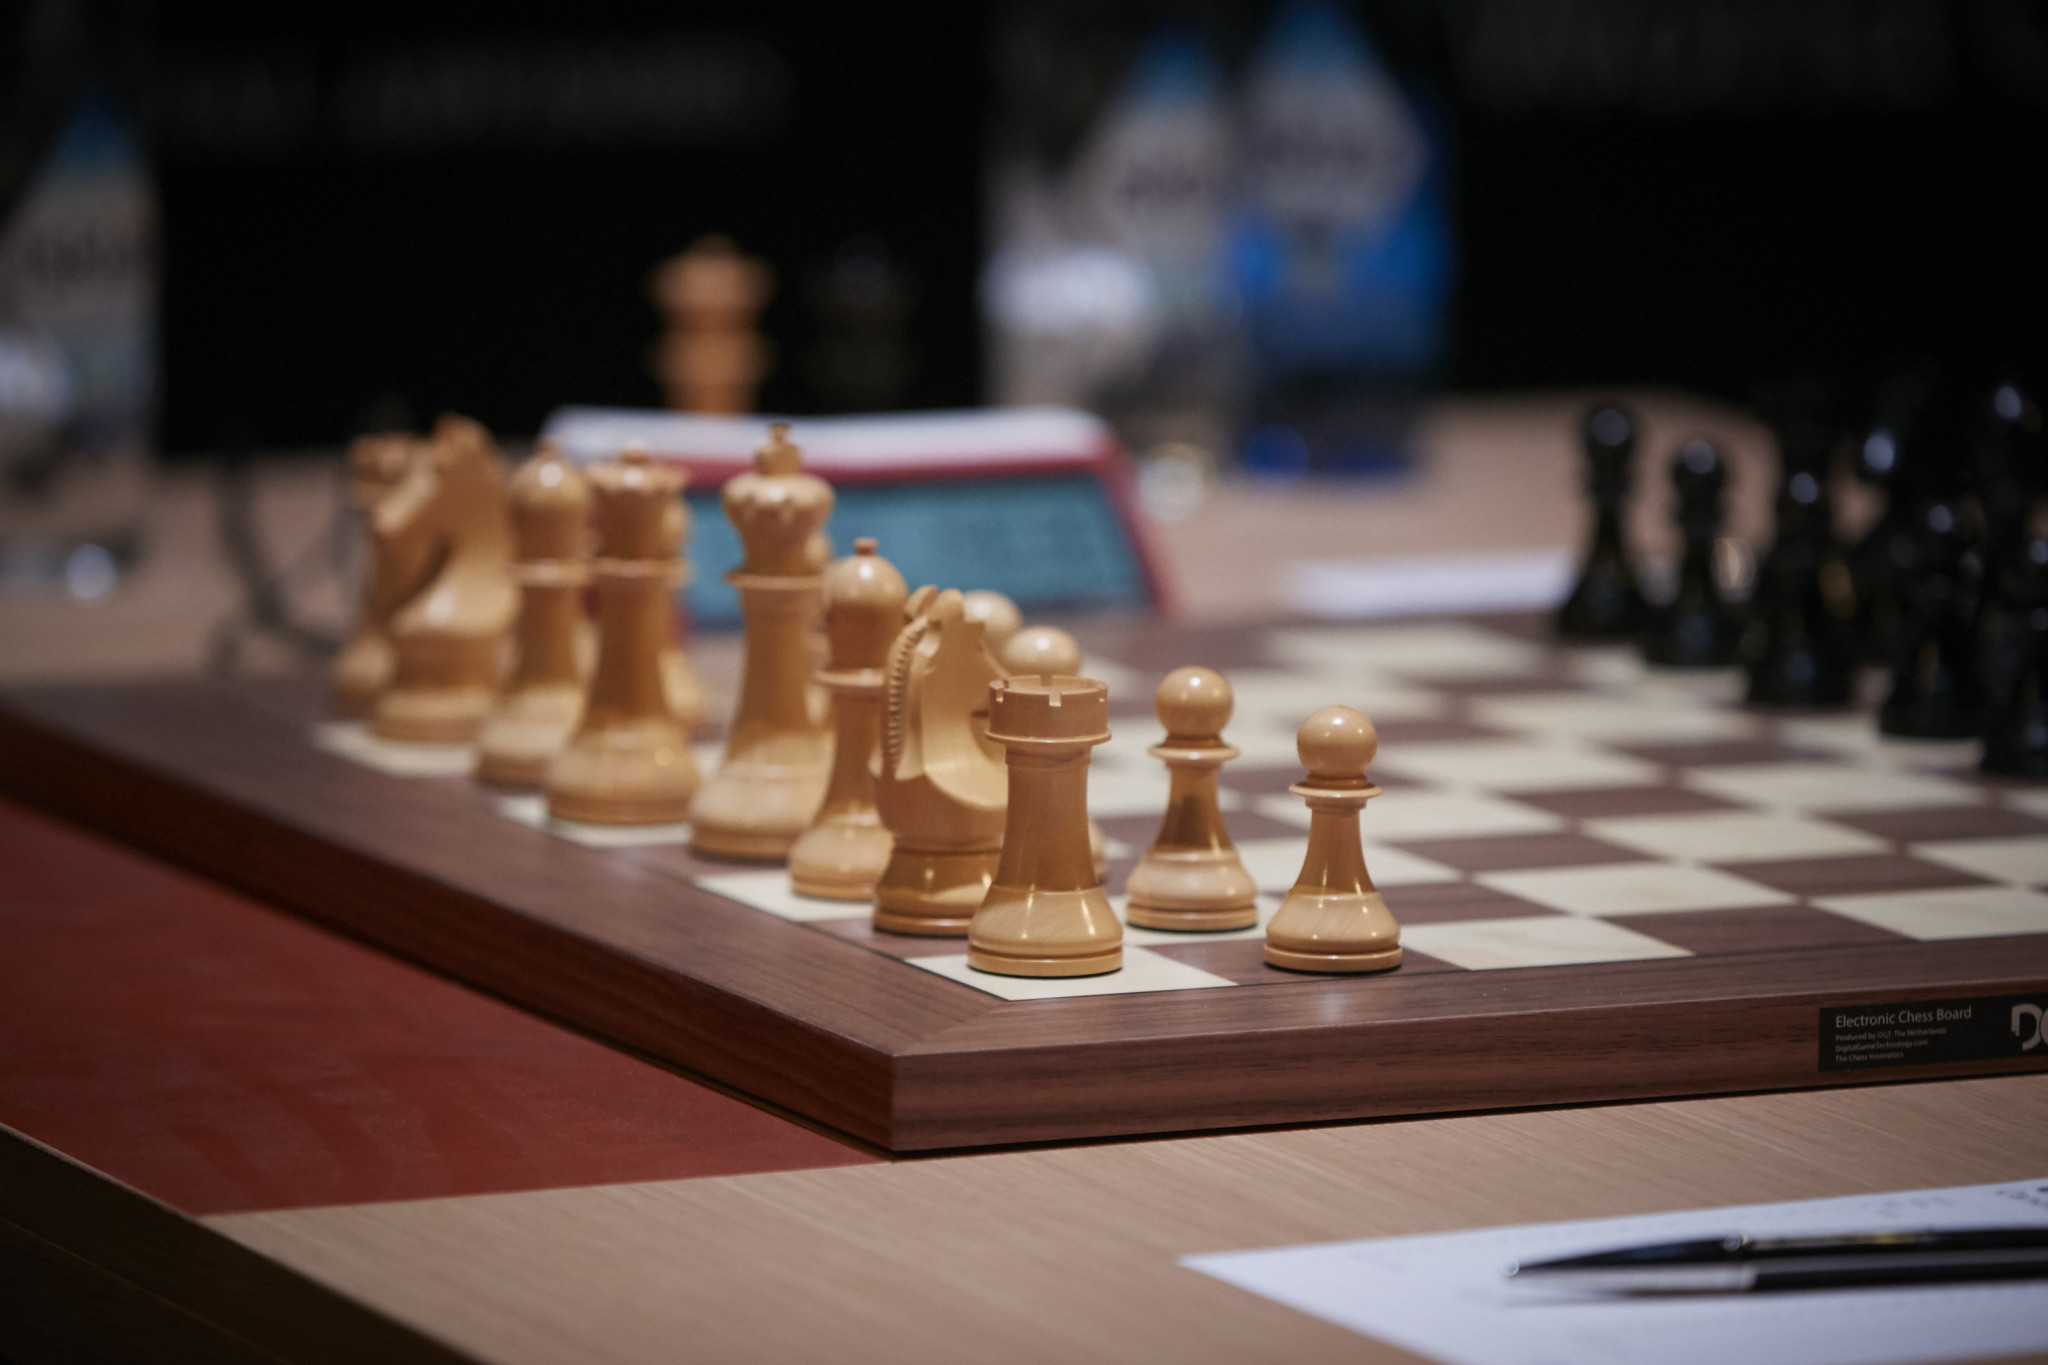 Russians and Belarusians' ability to compete as neutrals extended until 2024 by FIDE